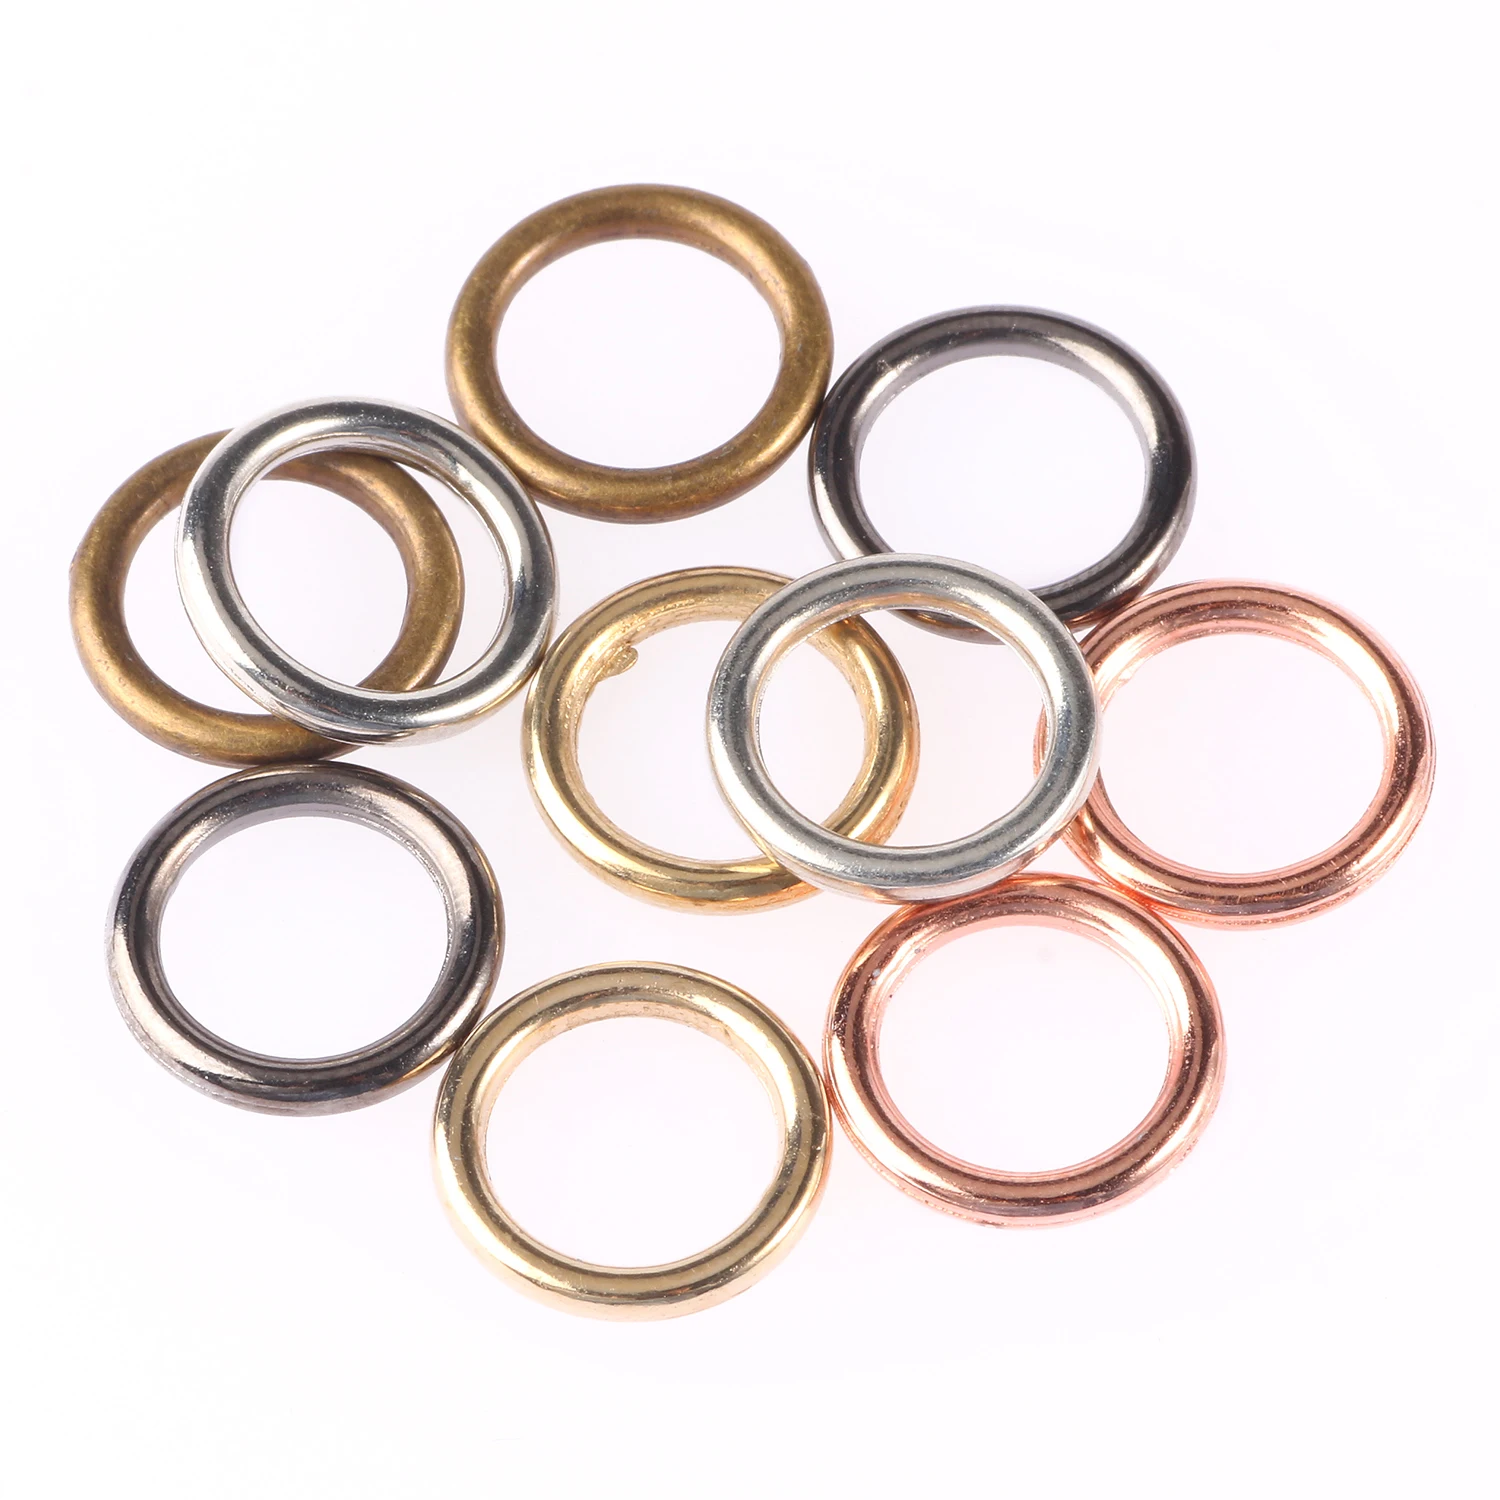 

300-100pcs Multicolor Closed Rings Circle Earring Hoops Round Spacers Loops Connectors For Jewelry Making Accessories Supplies